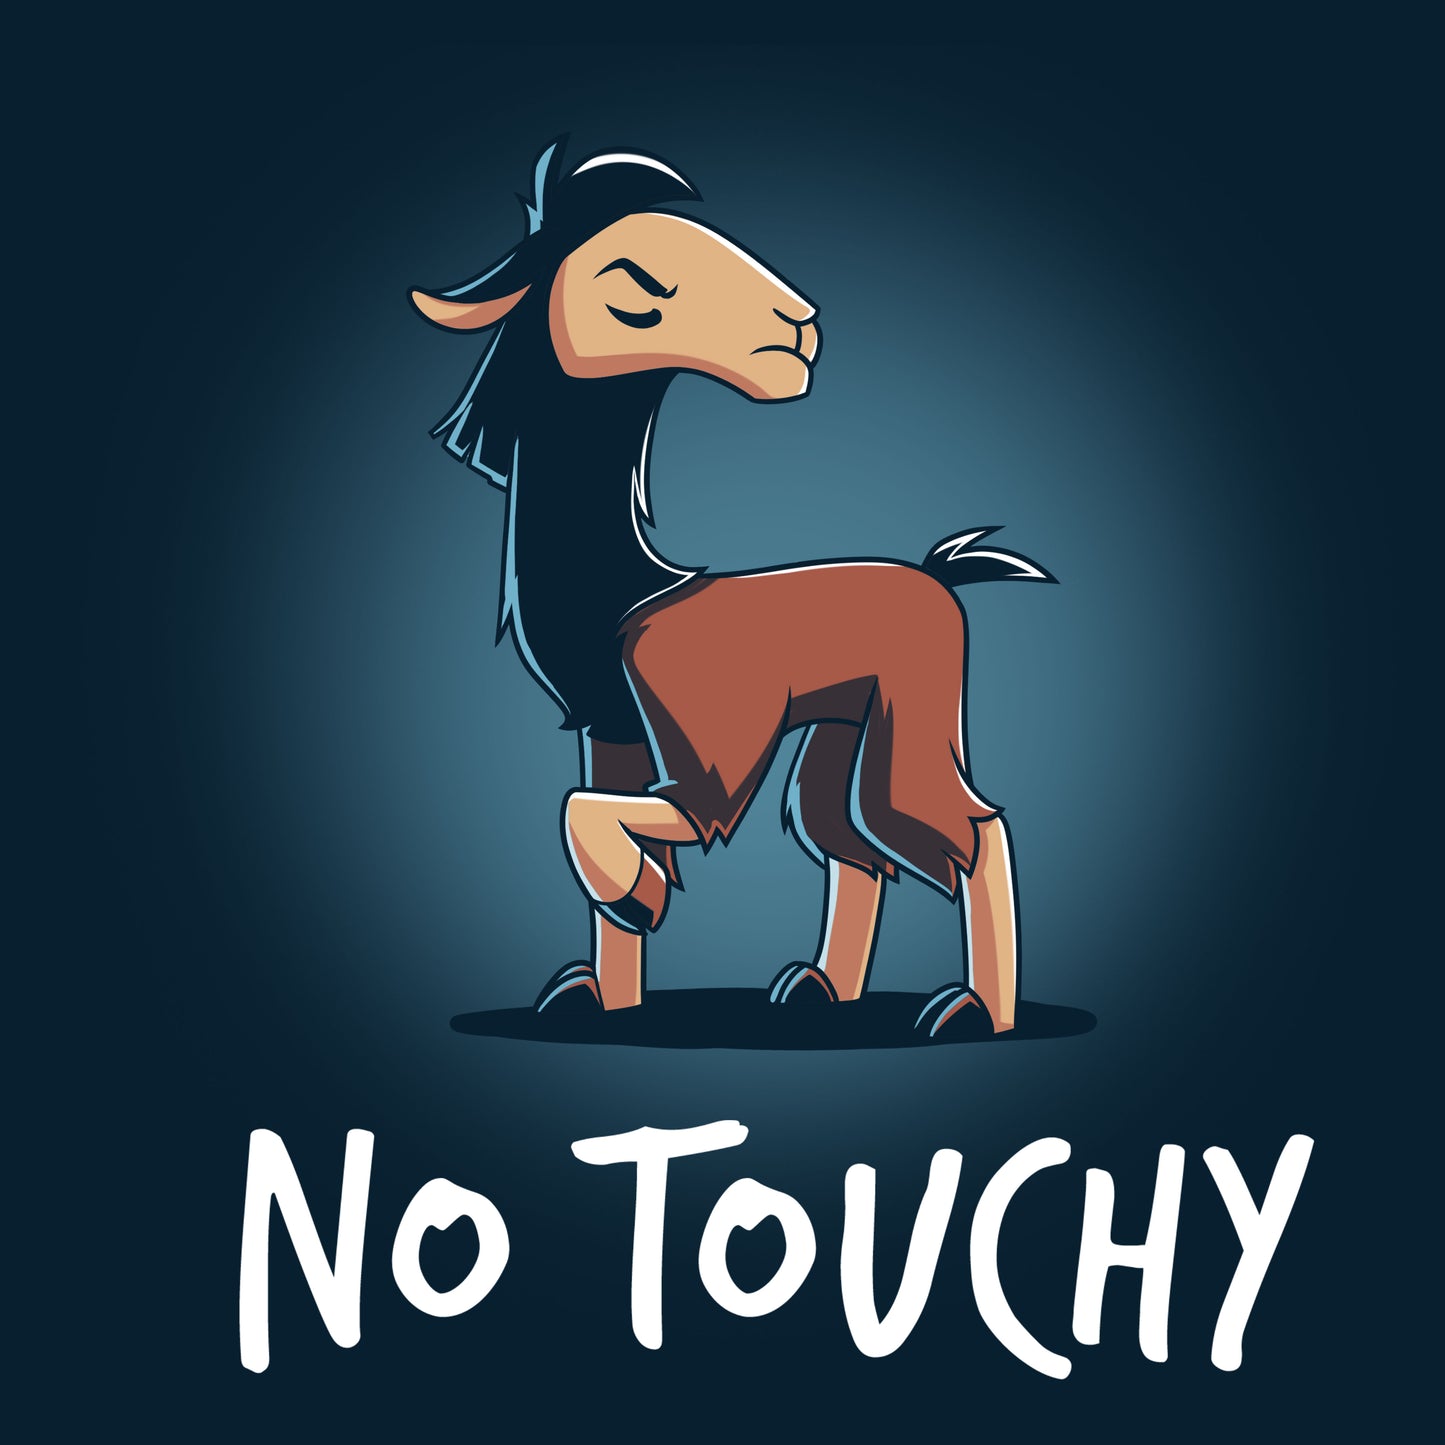 A Disney No Touchy T-shirt featuring Emperor Kuzco with the words "no touchy" and a cartoon goat.